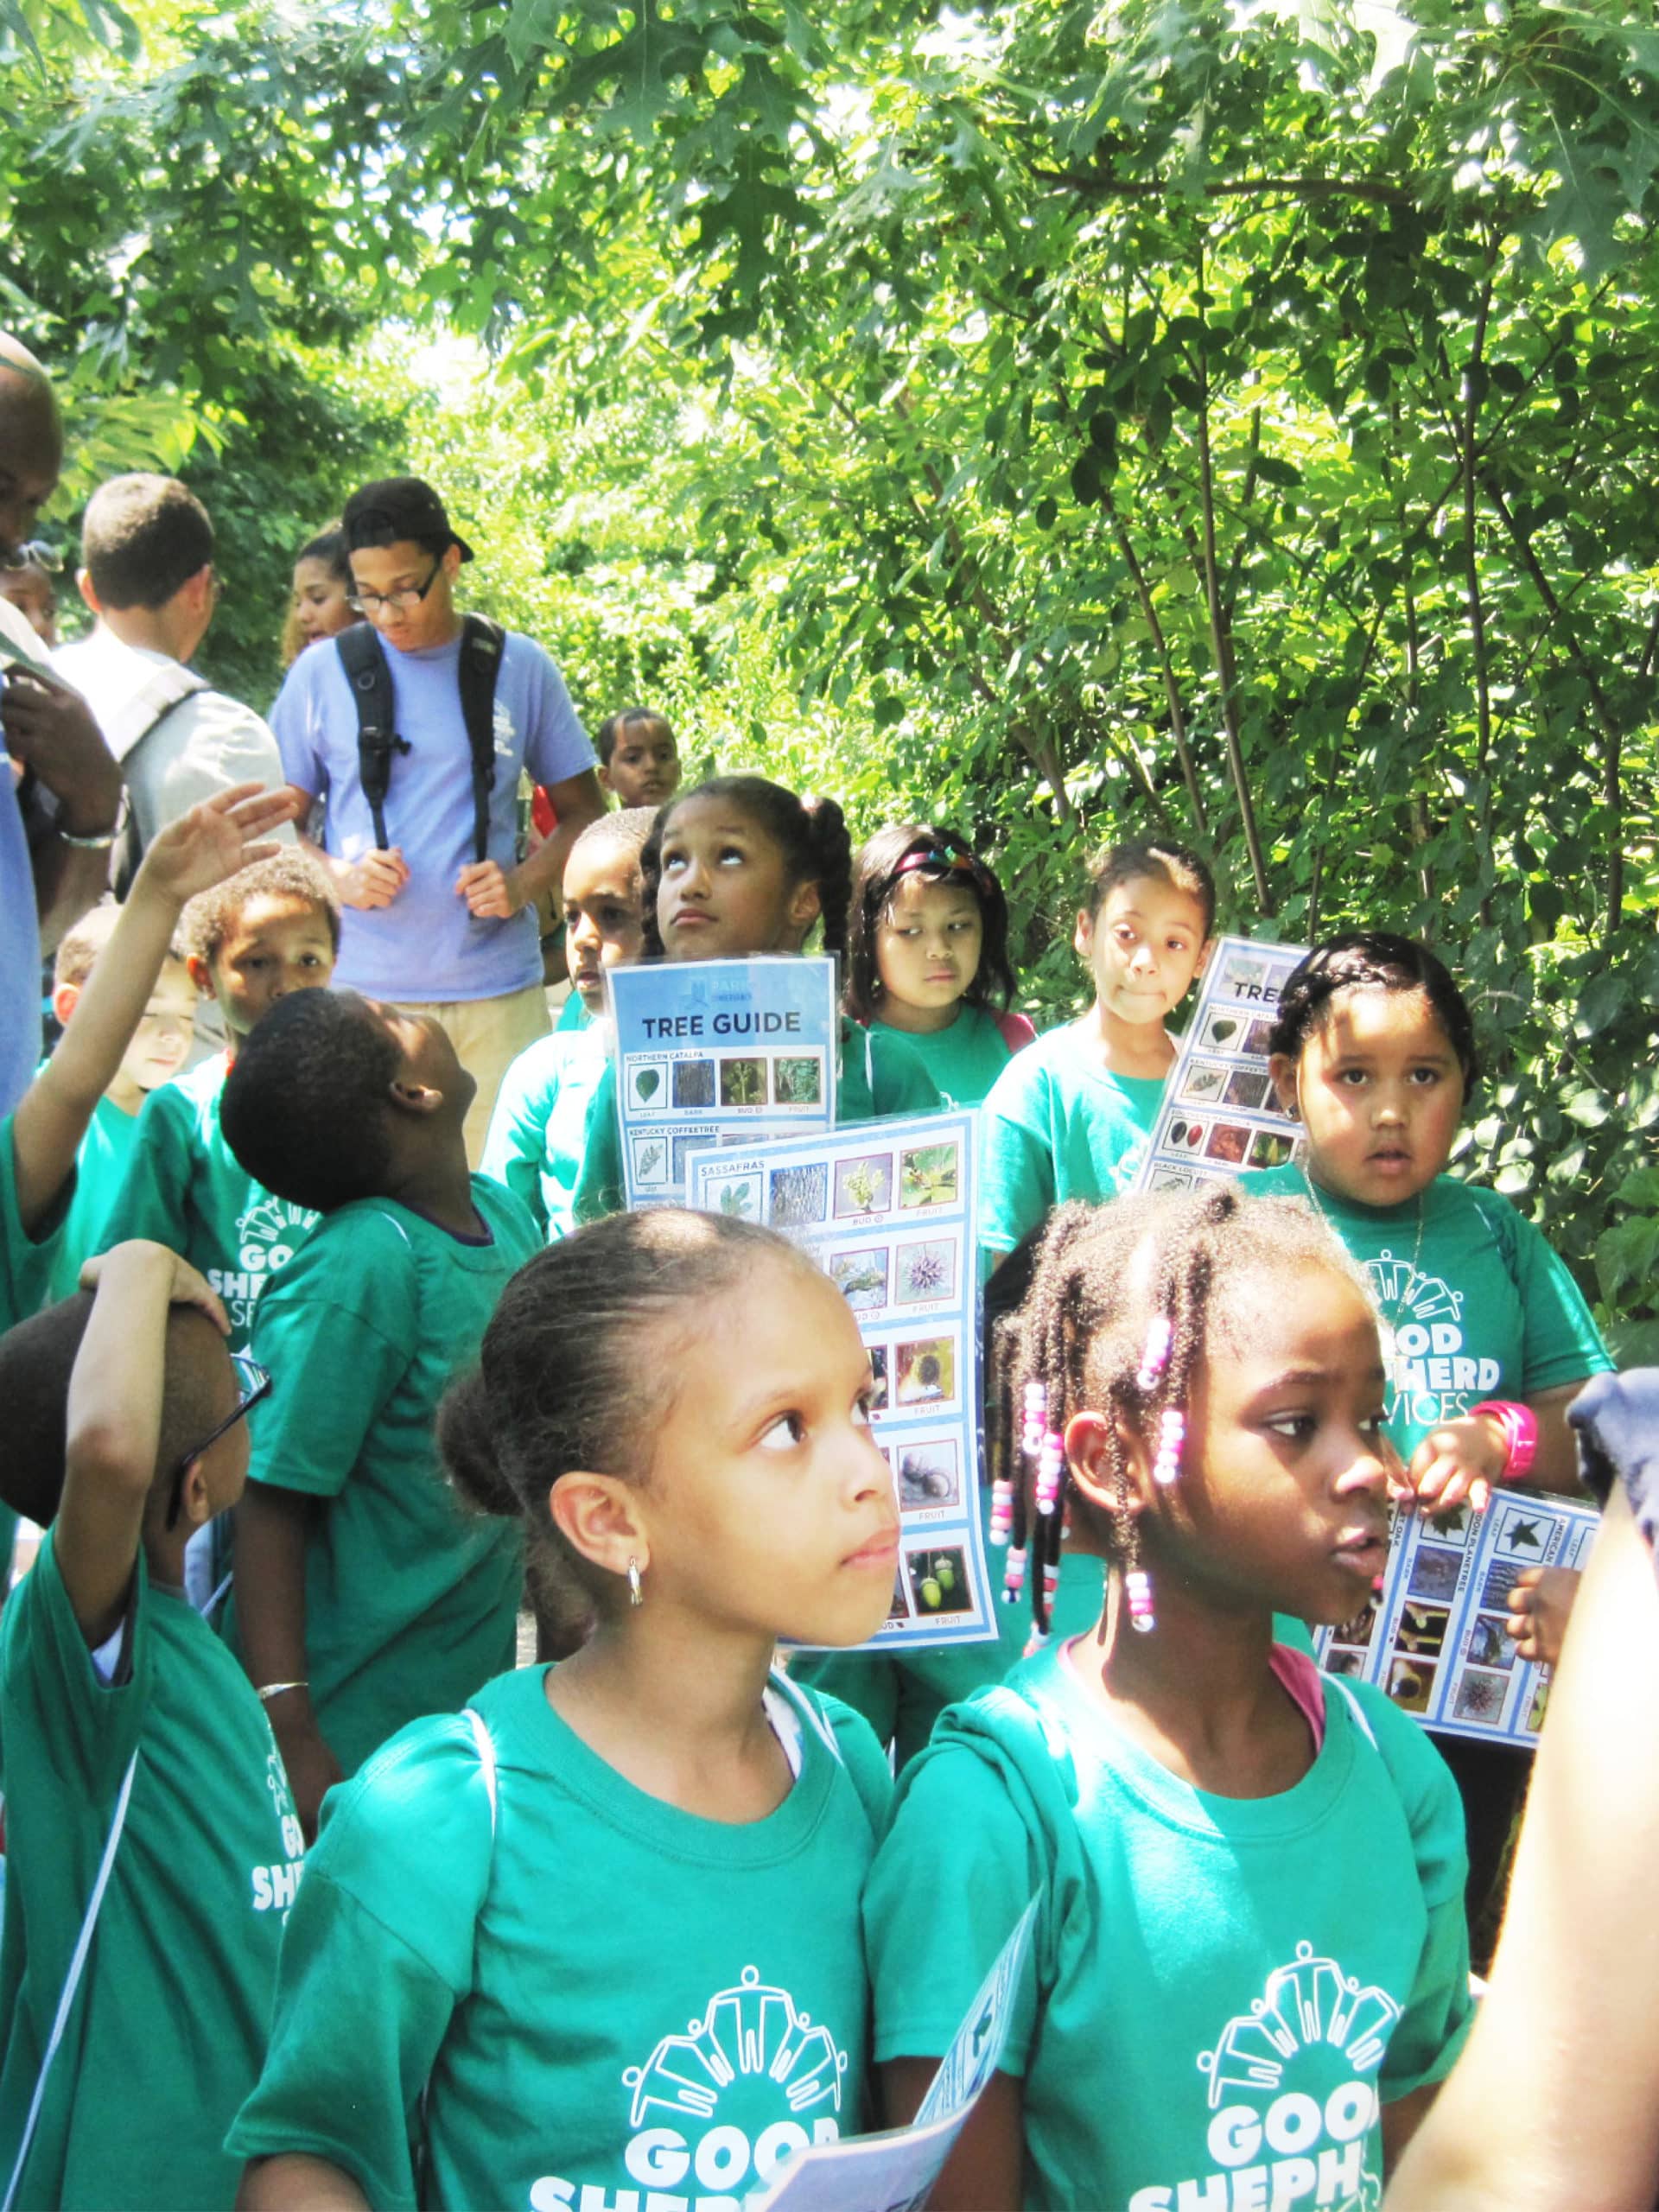 School group on a tree-lined path holding tree guides.